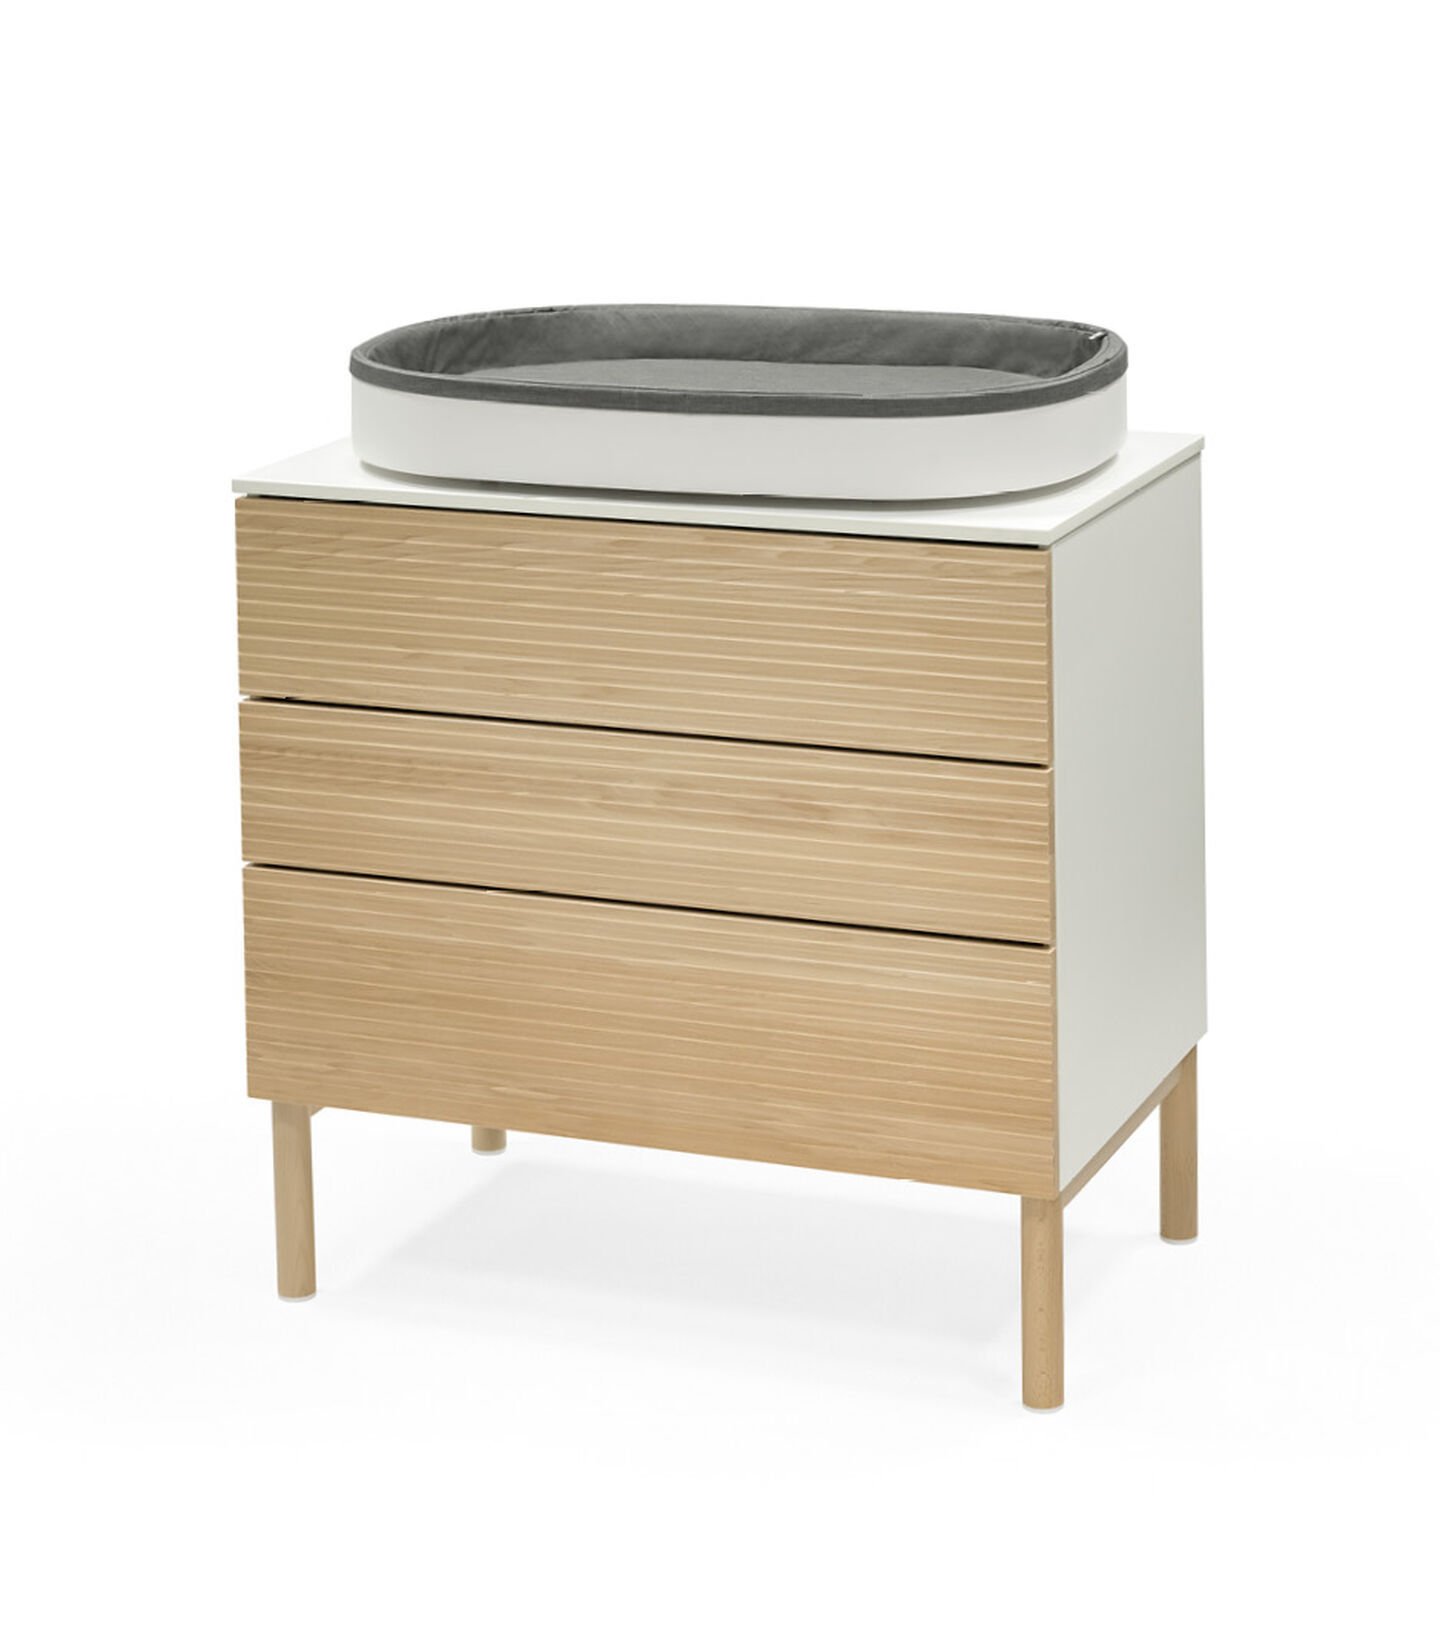 Stokke® Sleepi™ Dresser, Natural. With Changer on Top. Changing Pad Grey. view 2